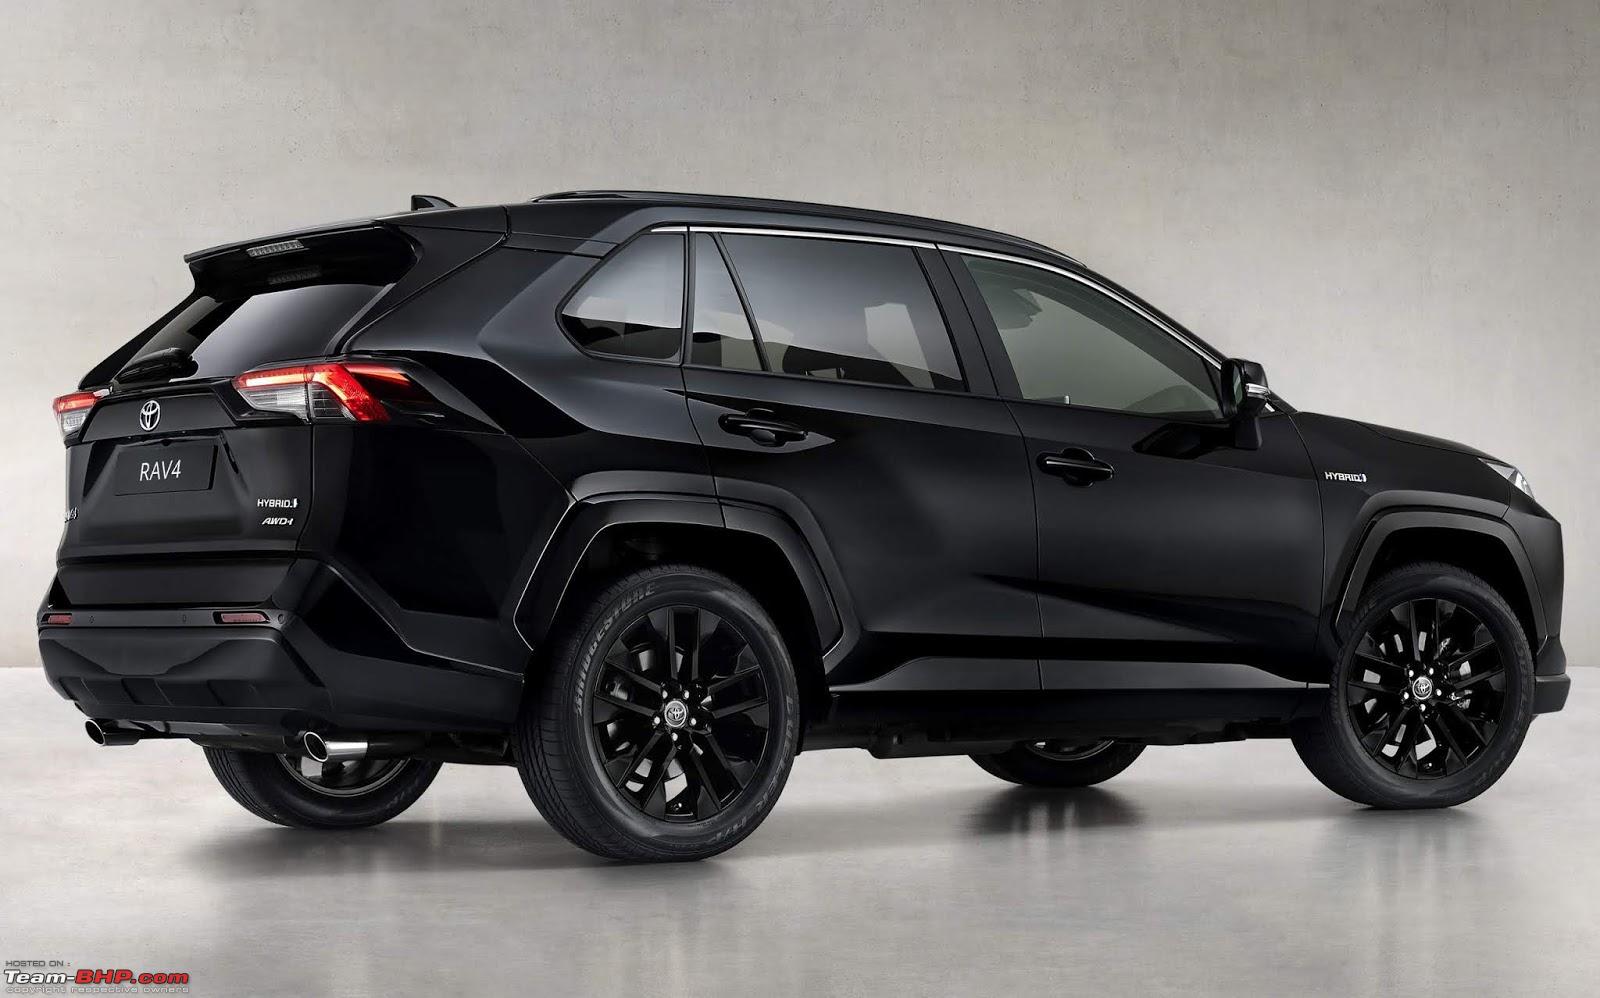 Toyota RAV4 Prime The most powerful & fuelefficient ever! 0 to 60 mph